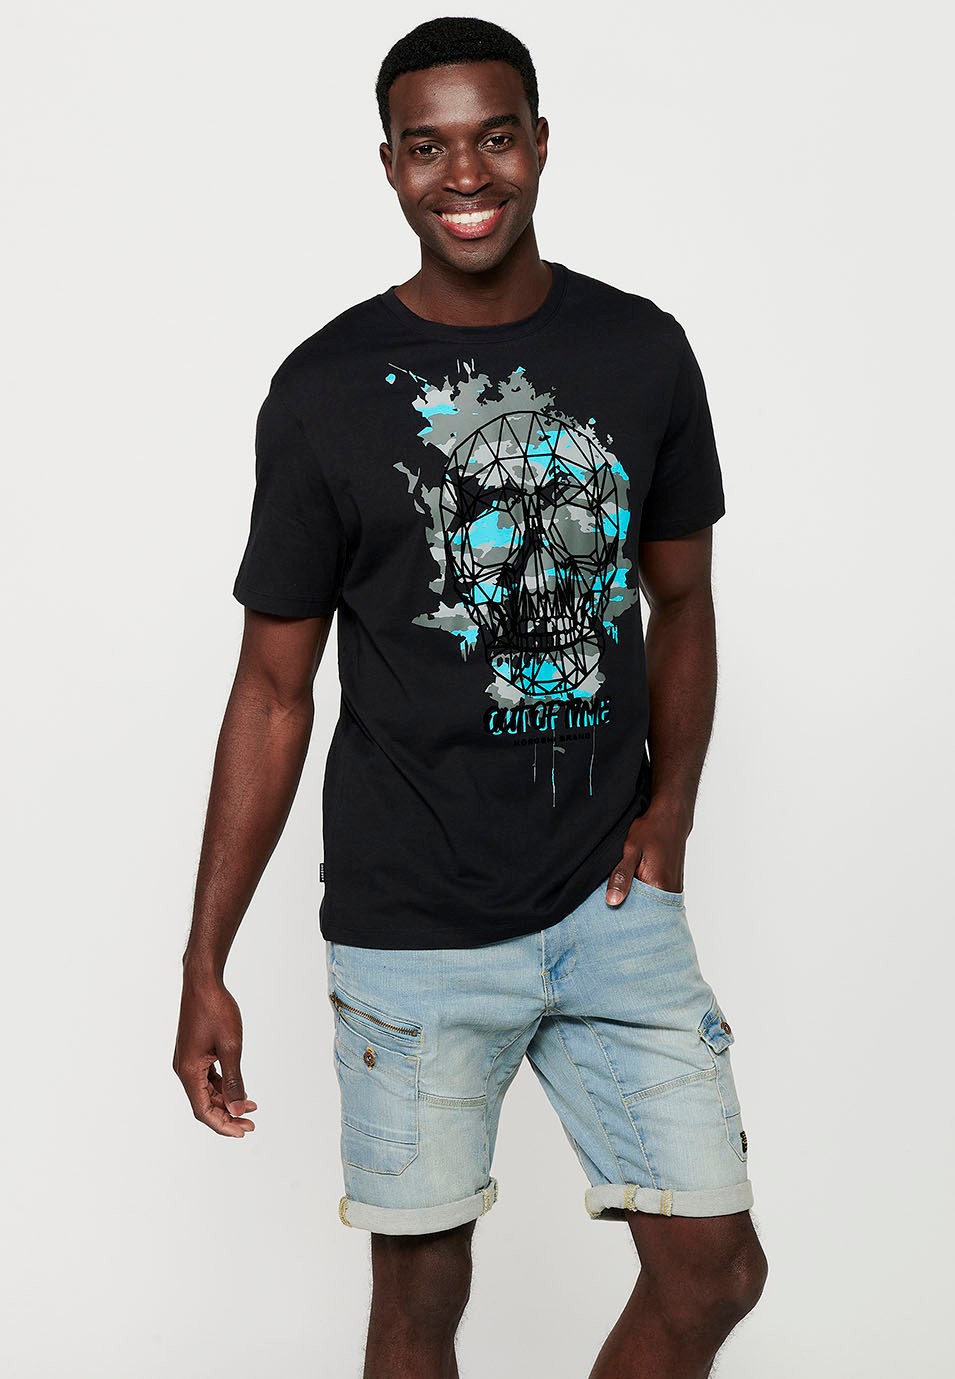 Men's Black Short Sleeve T-Shirt with Front Print and Round Neck